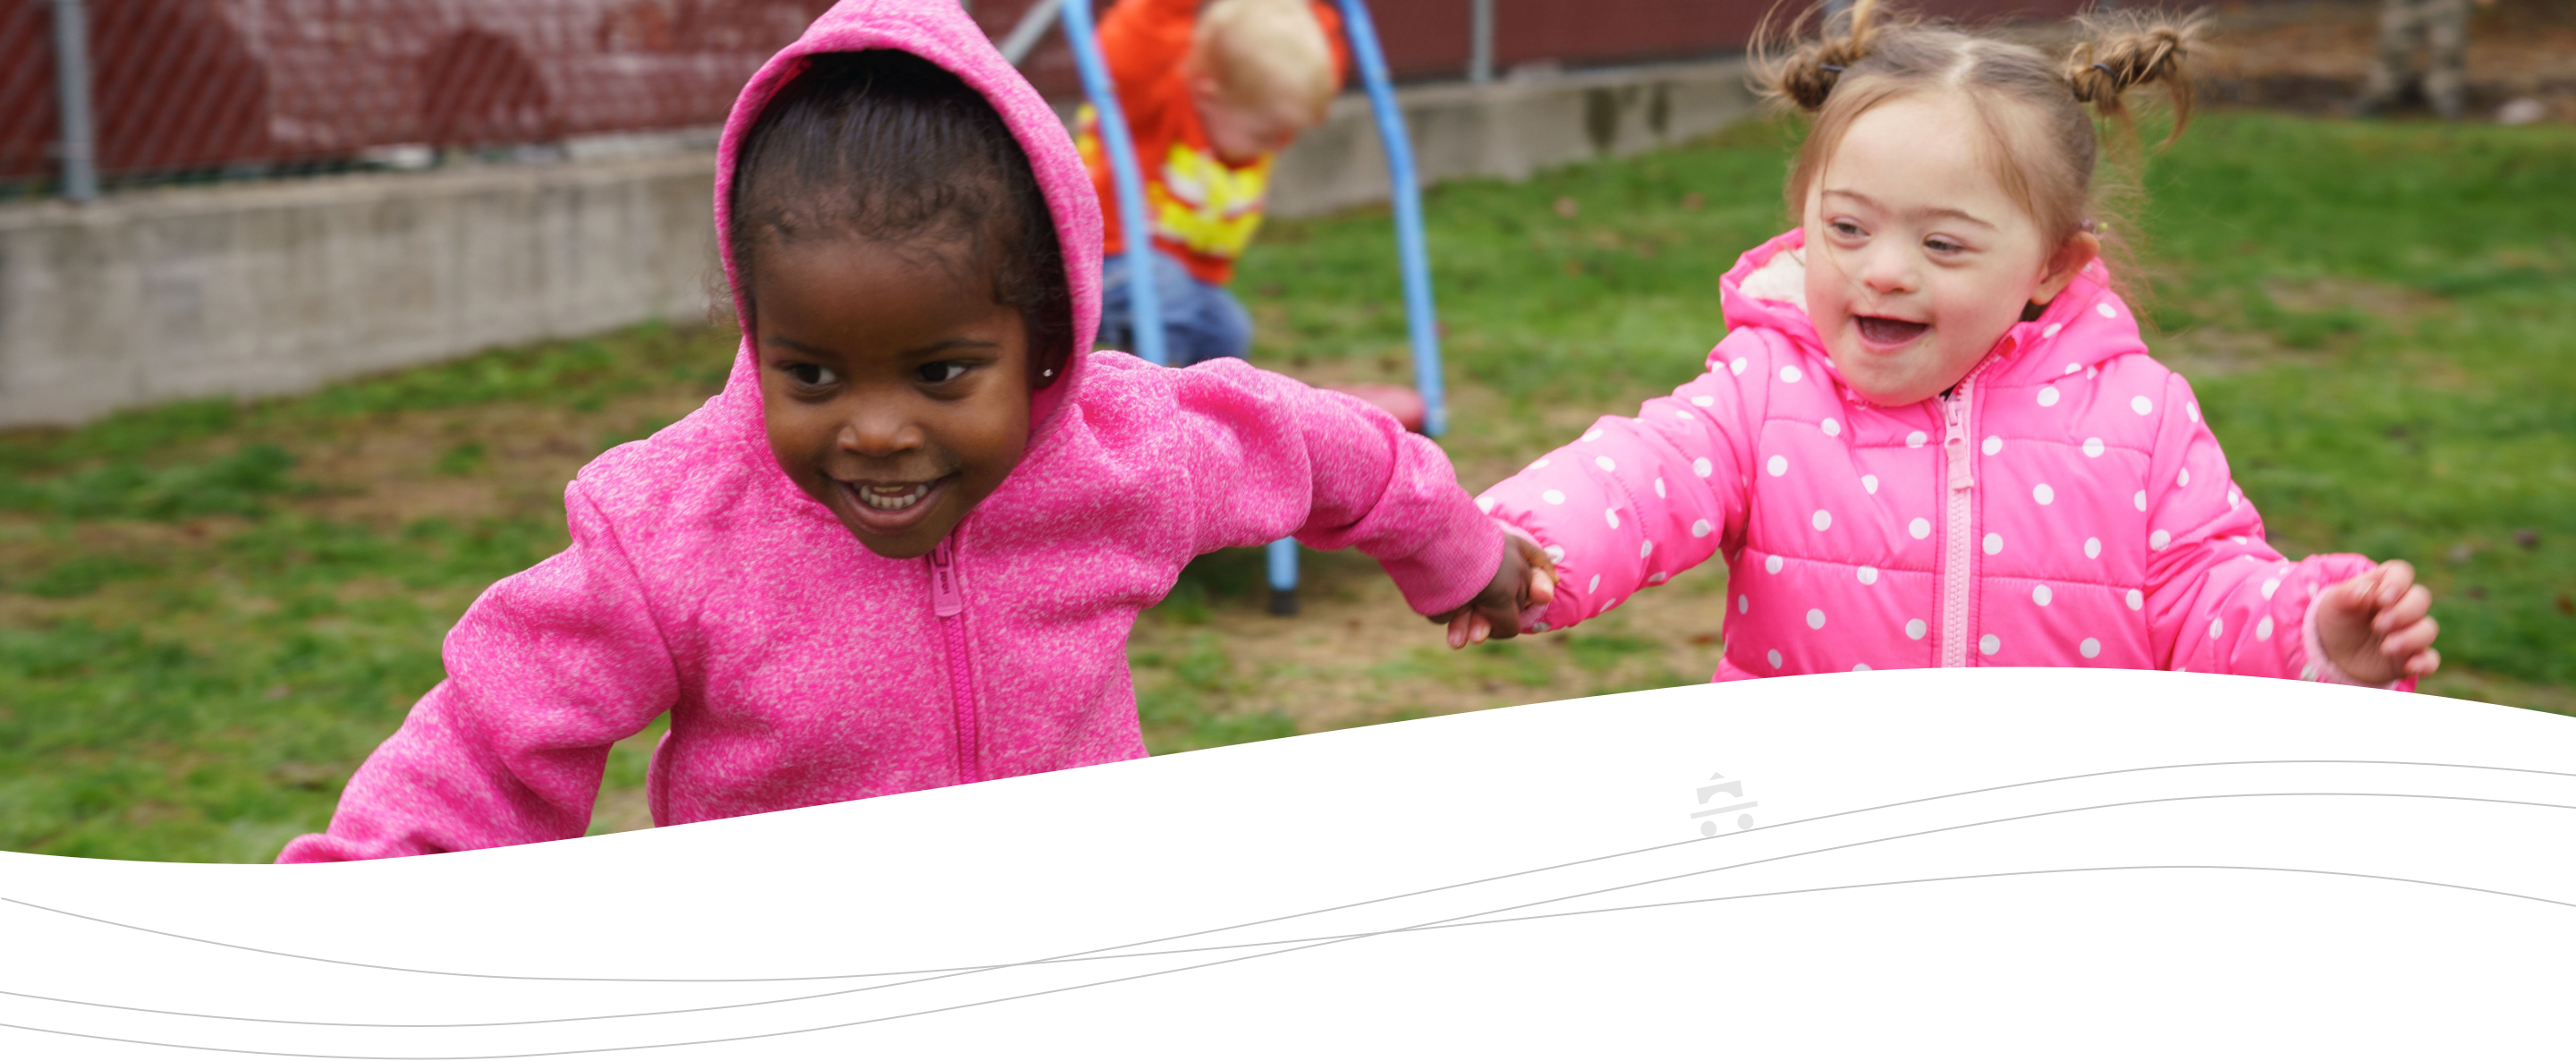 Two preschoolers hold hands while running outside.  Another preschooler is in the background jumping on a child size trampoline.